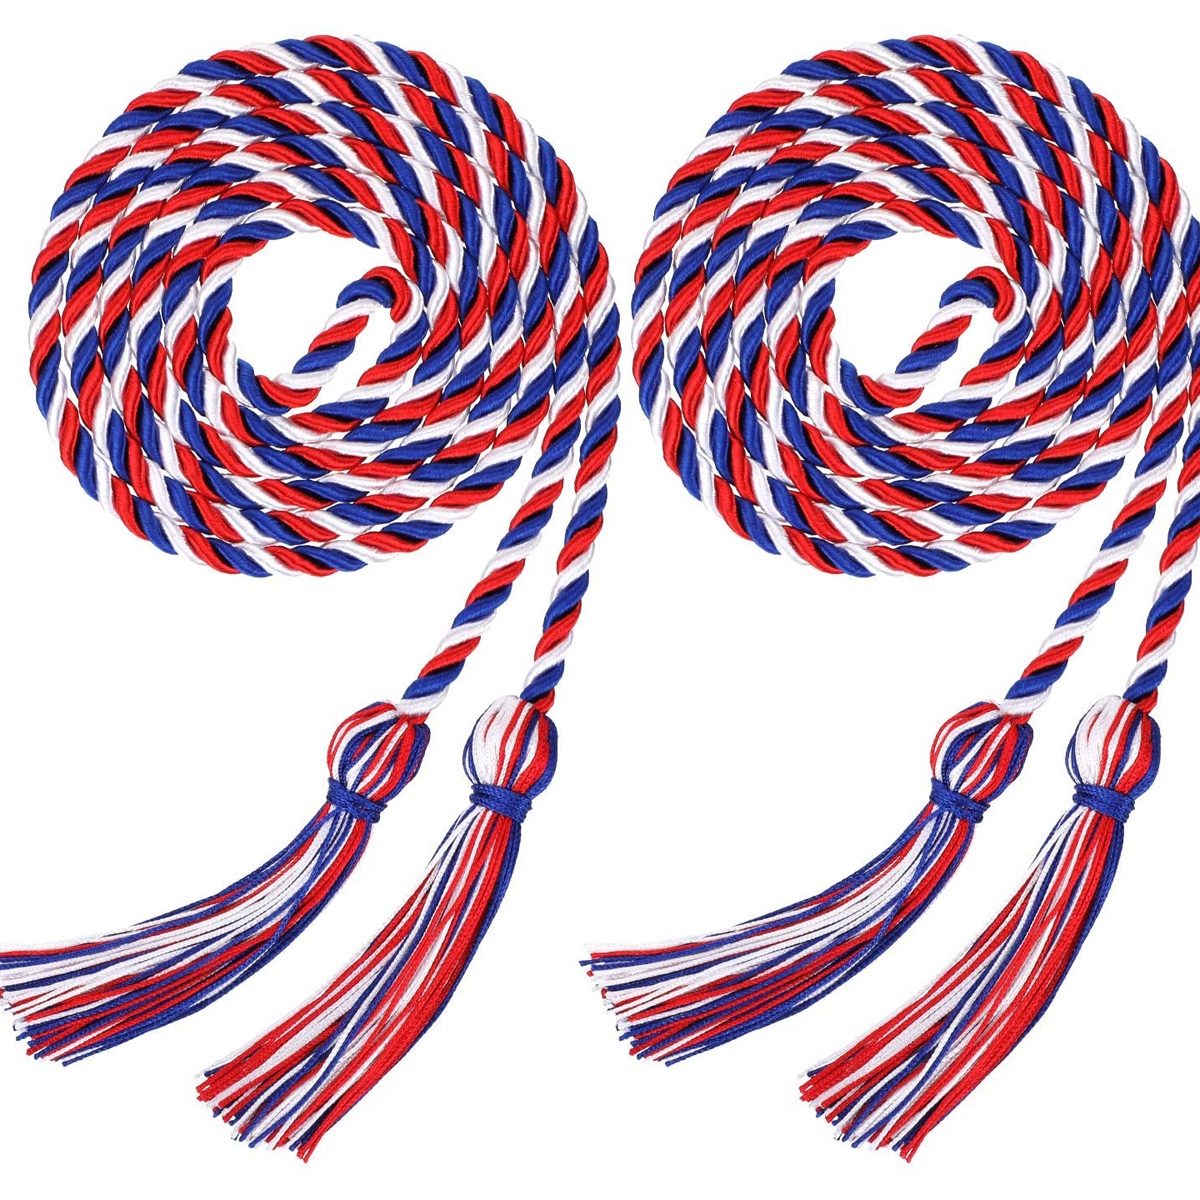 Graduation Cords Polyester Yarn Honor Cord with Tassel for Graduation Students (Blue Red with White)